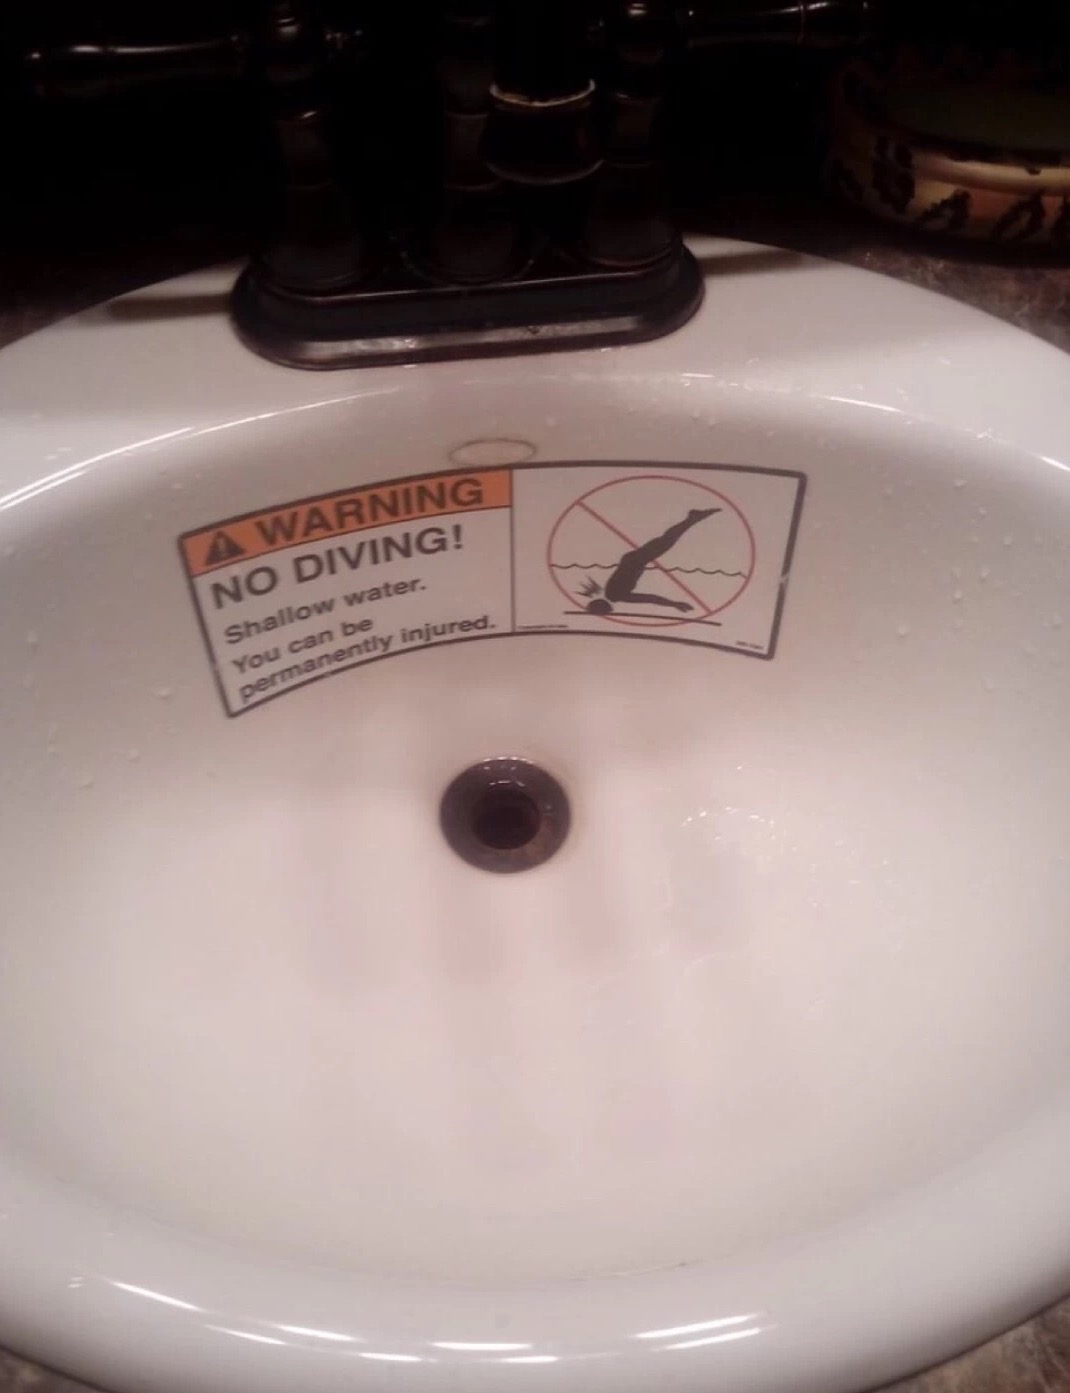 Sink that tells you to not dive into it.